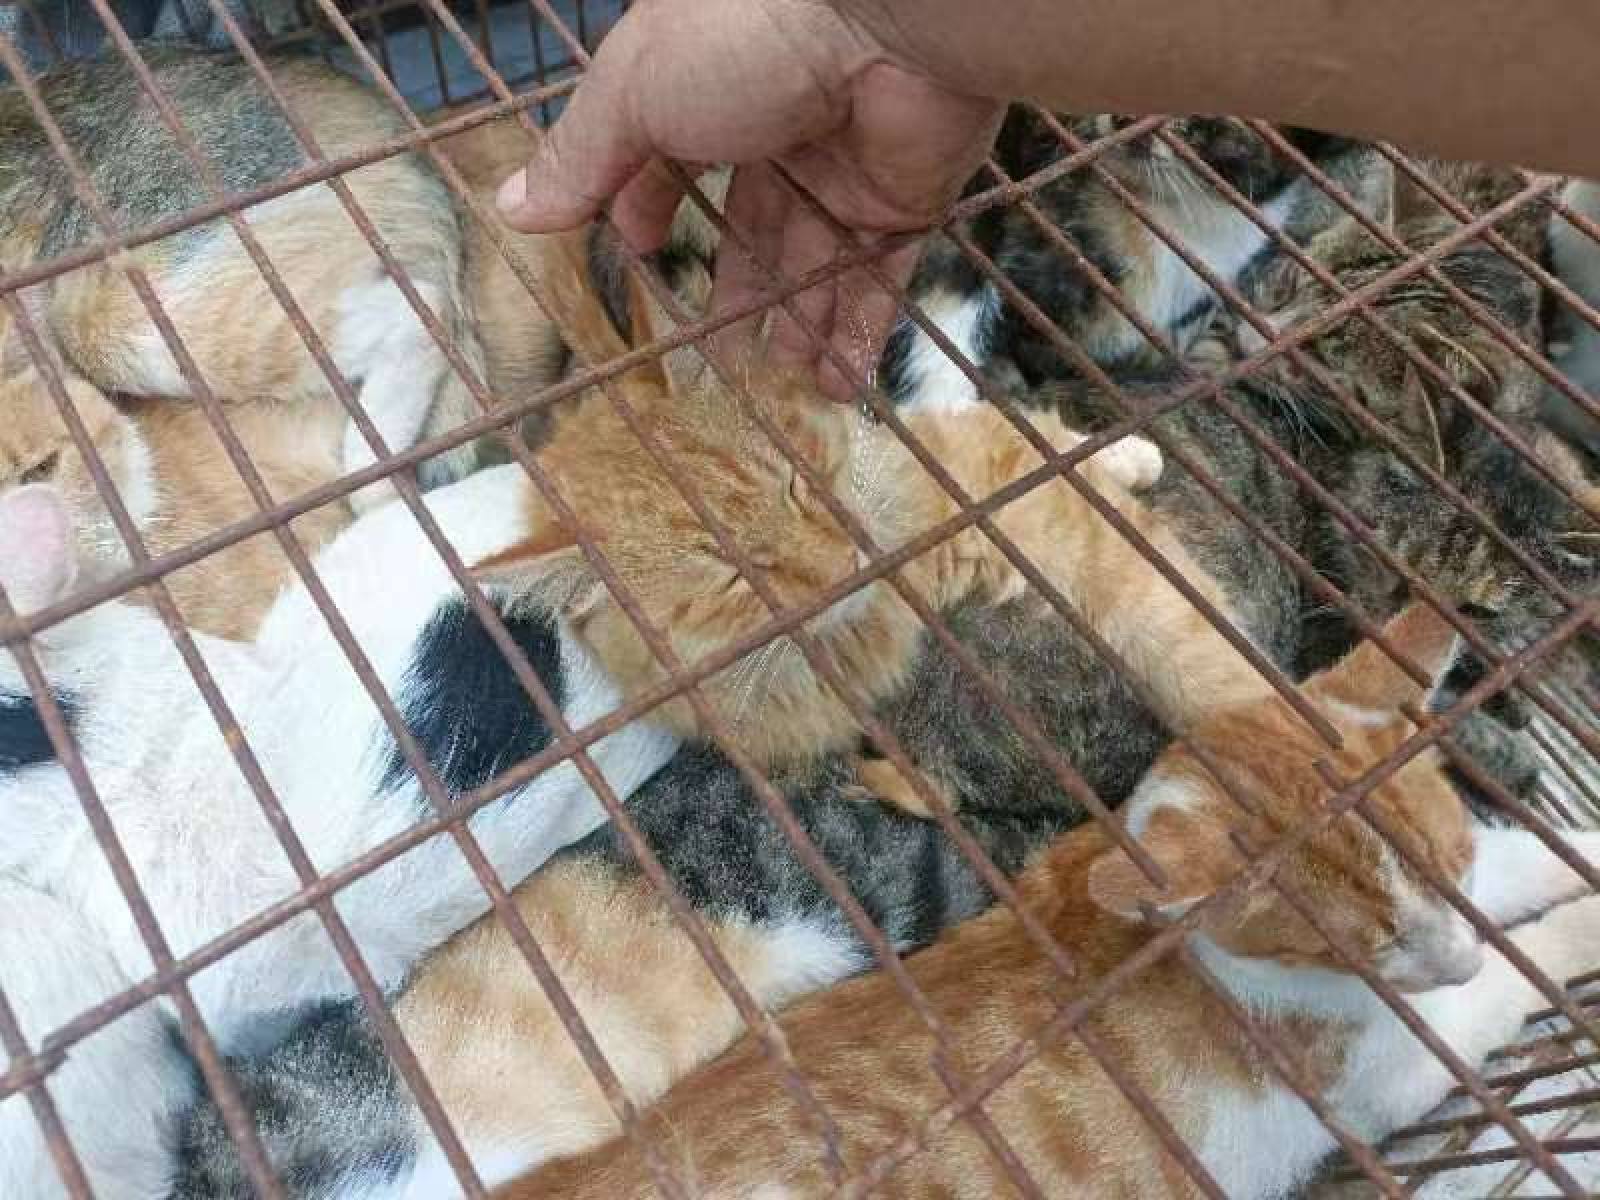 Rescuers said many of the cats were in poor physical condition and that many were crying out when they arrived. Photo: HSI